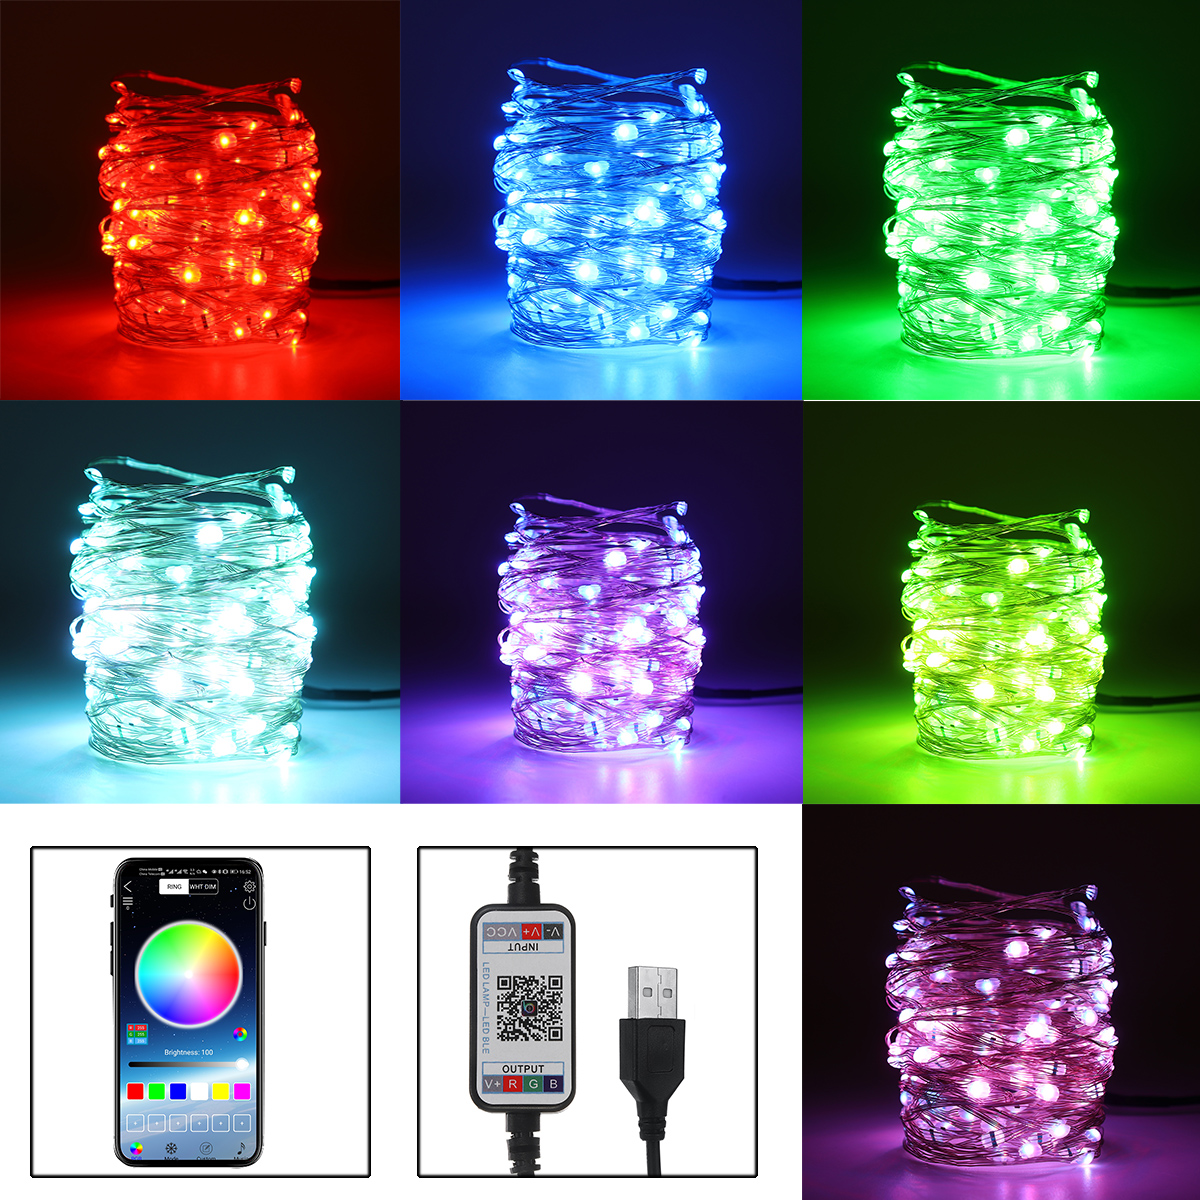 LED-Waterproof-USB-Christmas-Tree-Strip-Music-String-Personalized-Lights-Decor-Christmas-Decorations-1776891-10